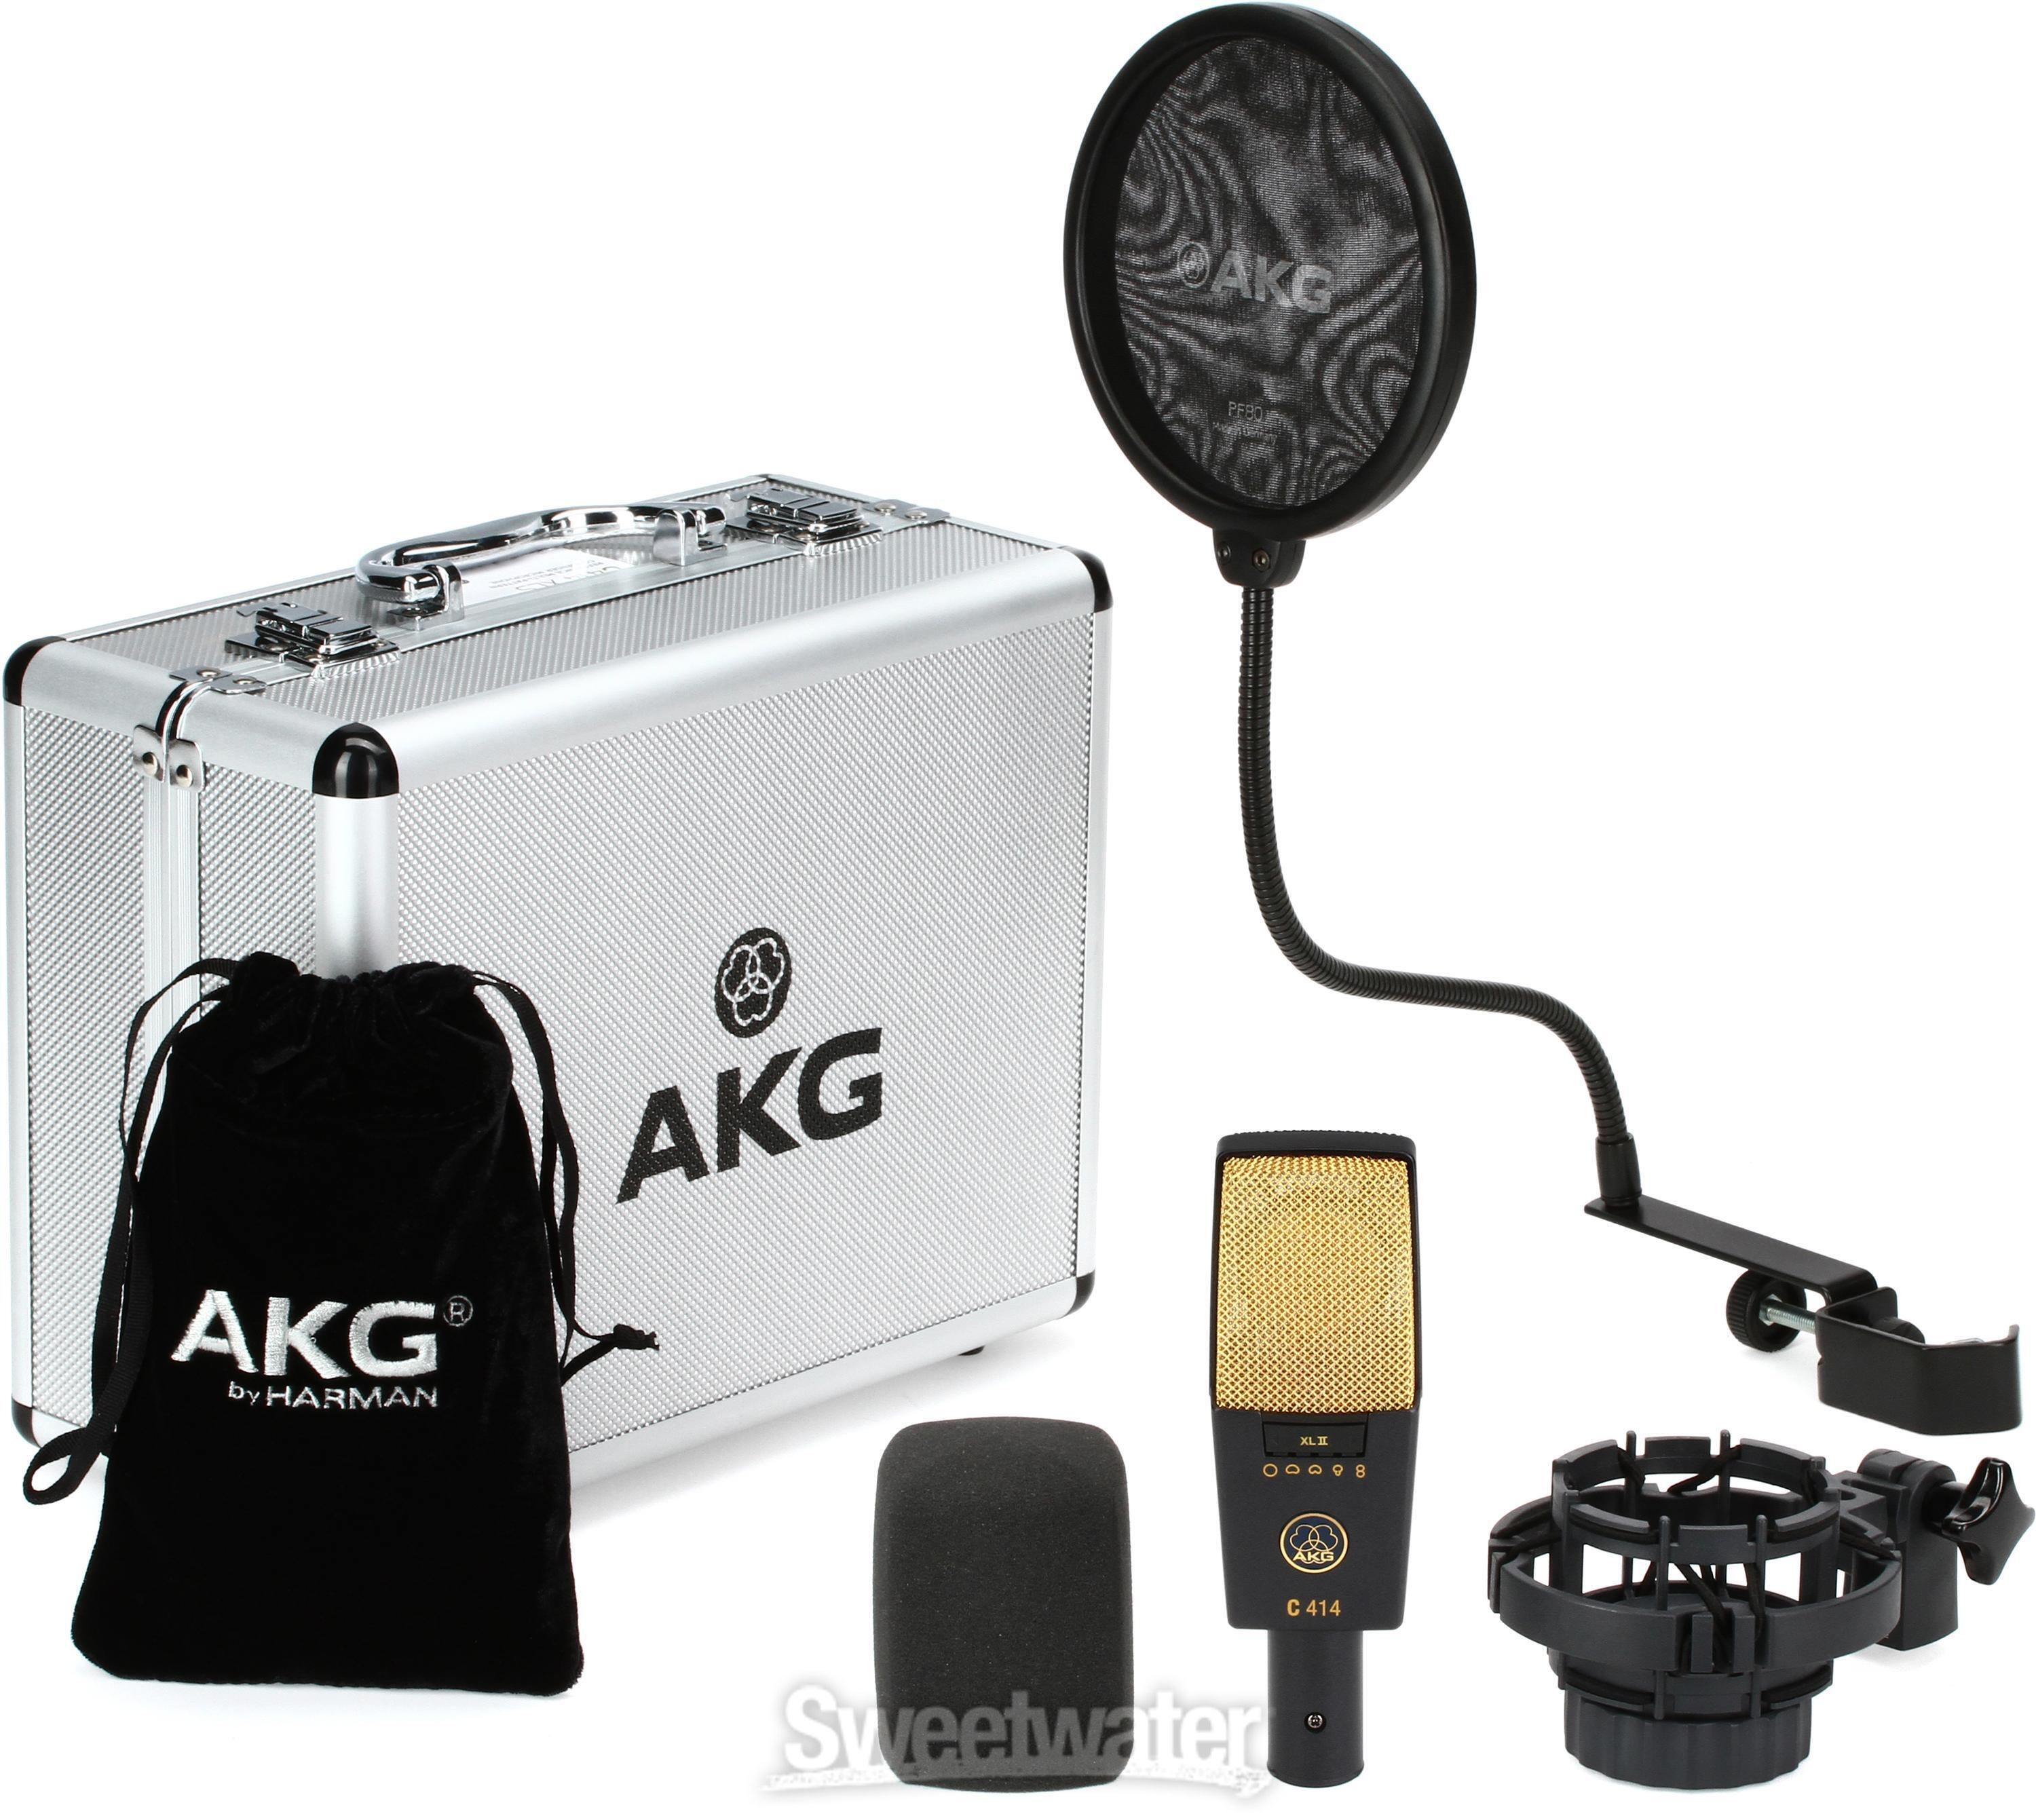 AKG C414 XLII Large-diaphragm Condenser Microphone | Sweetwater